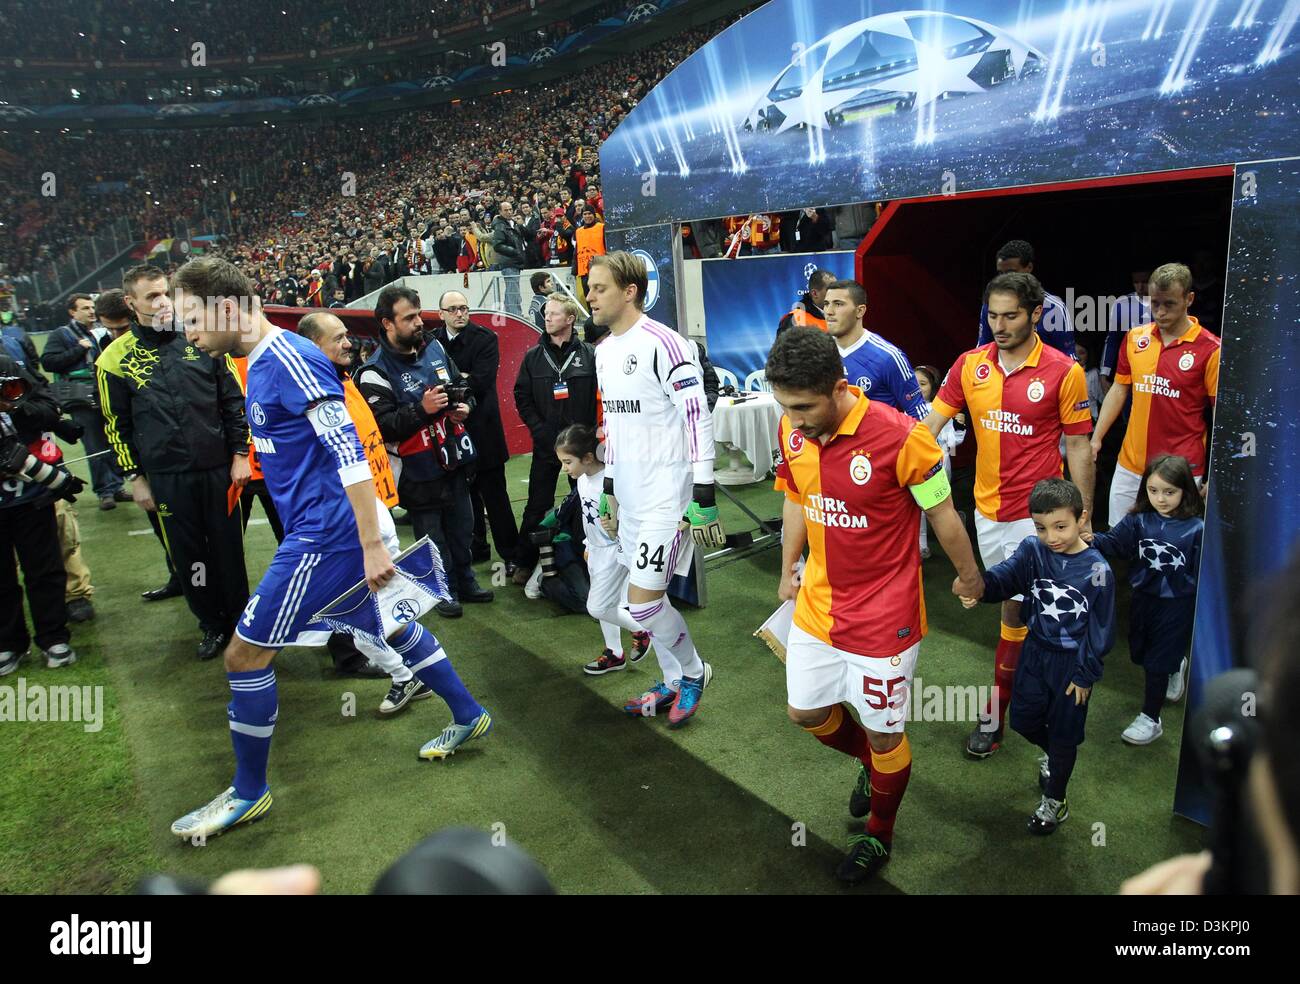 Galatasaray's Sabri Sarioglu (R) and Benedikt Hoewedes (L) and goalkeeper Timo Hildebrand (C) of Schalke enter the pitch prior to the UEFA Champions League round of 16 first leg soccer match between Galatasaray Istanbul and FC Schalke 04 at Ali Sami Yen Spor Kompleksi stadium in Istanbul, Turkey, 20 February 2013. Photo: Friso Gentsch/dpa Stock Photo